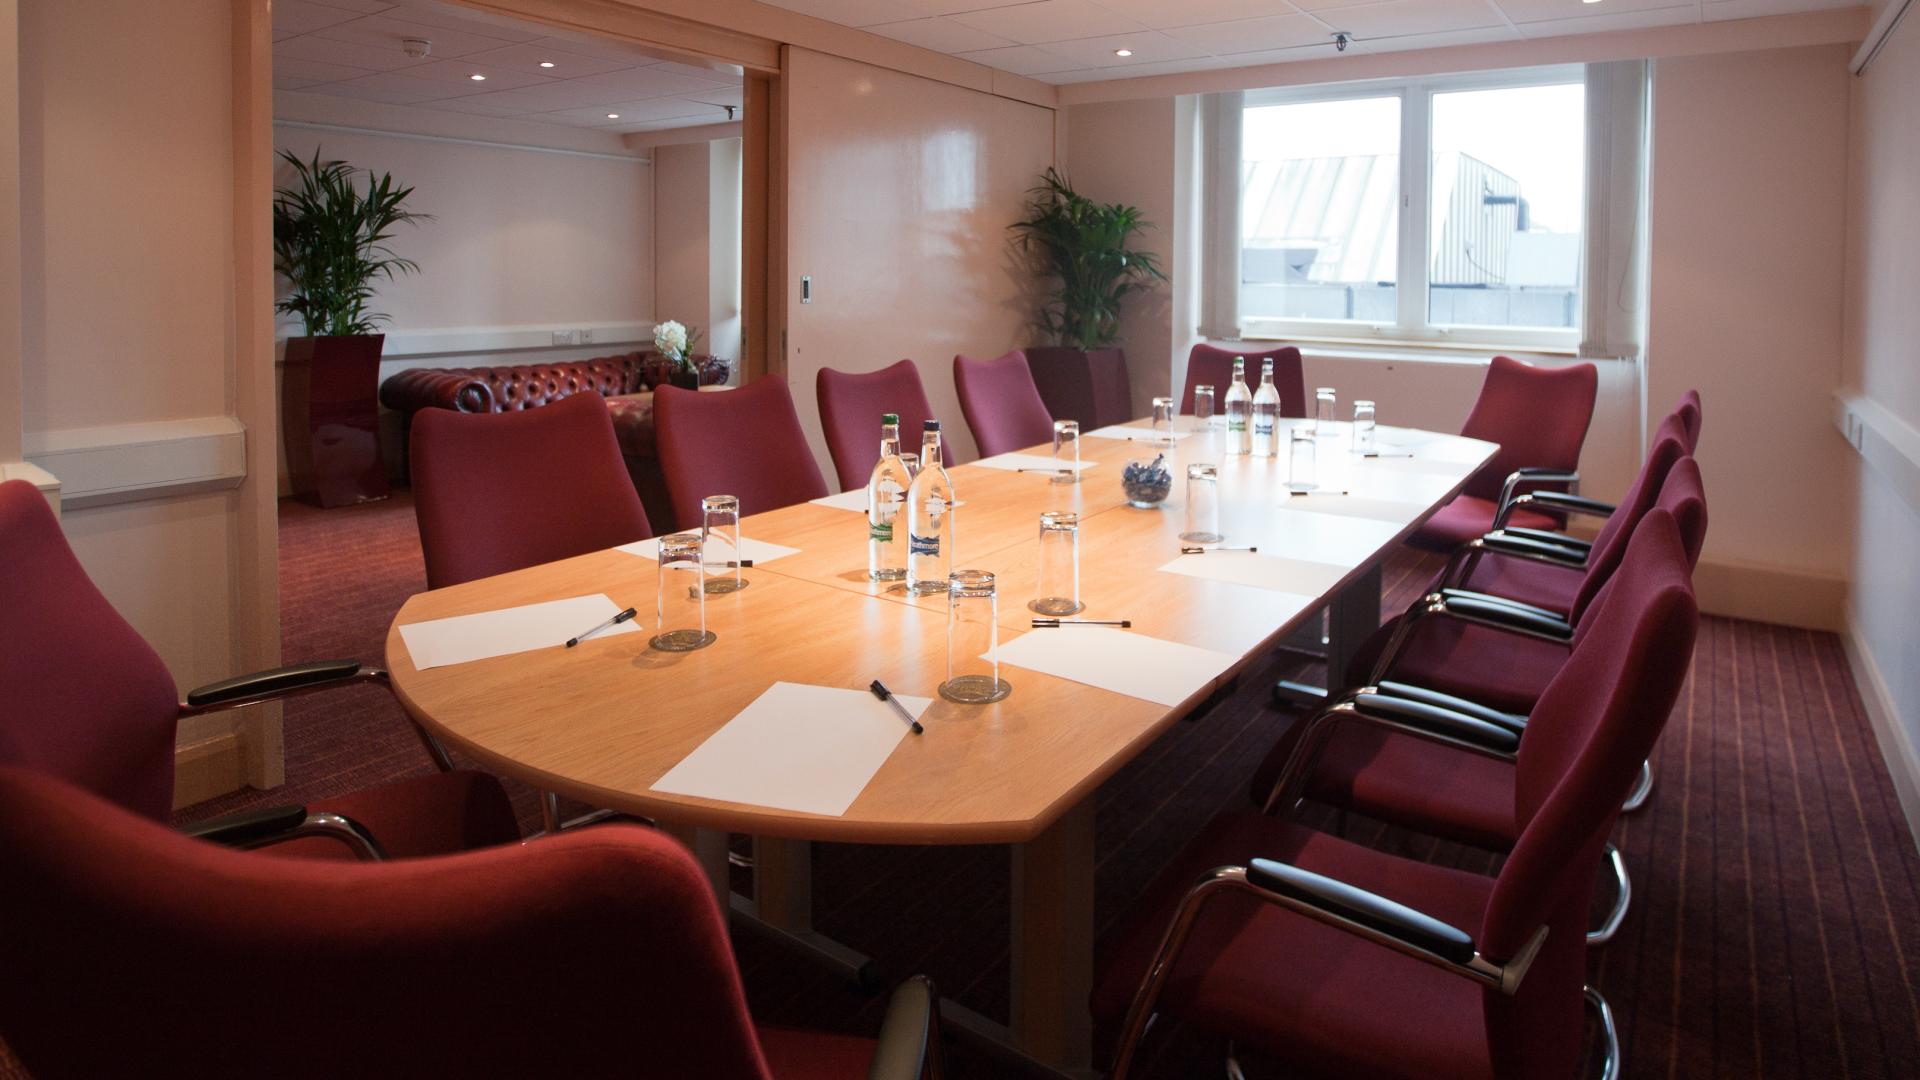 Meeting Rooms for Hire in Hammersmith